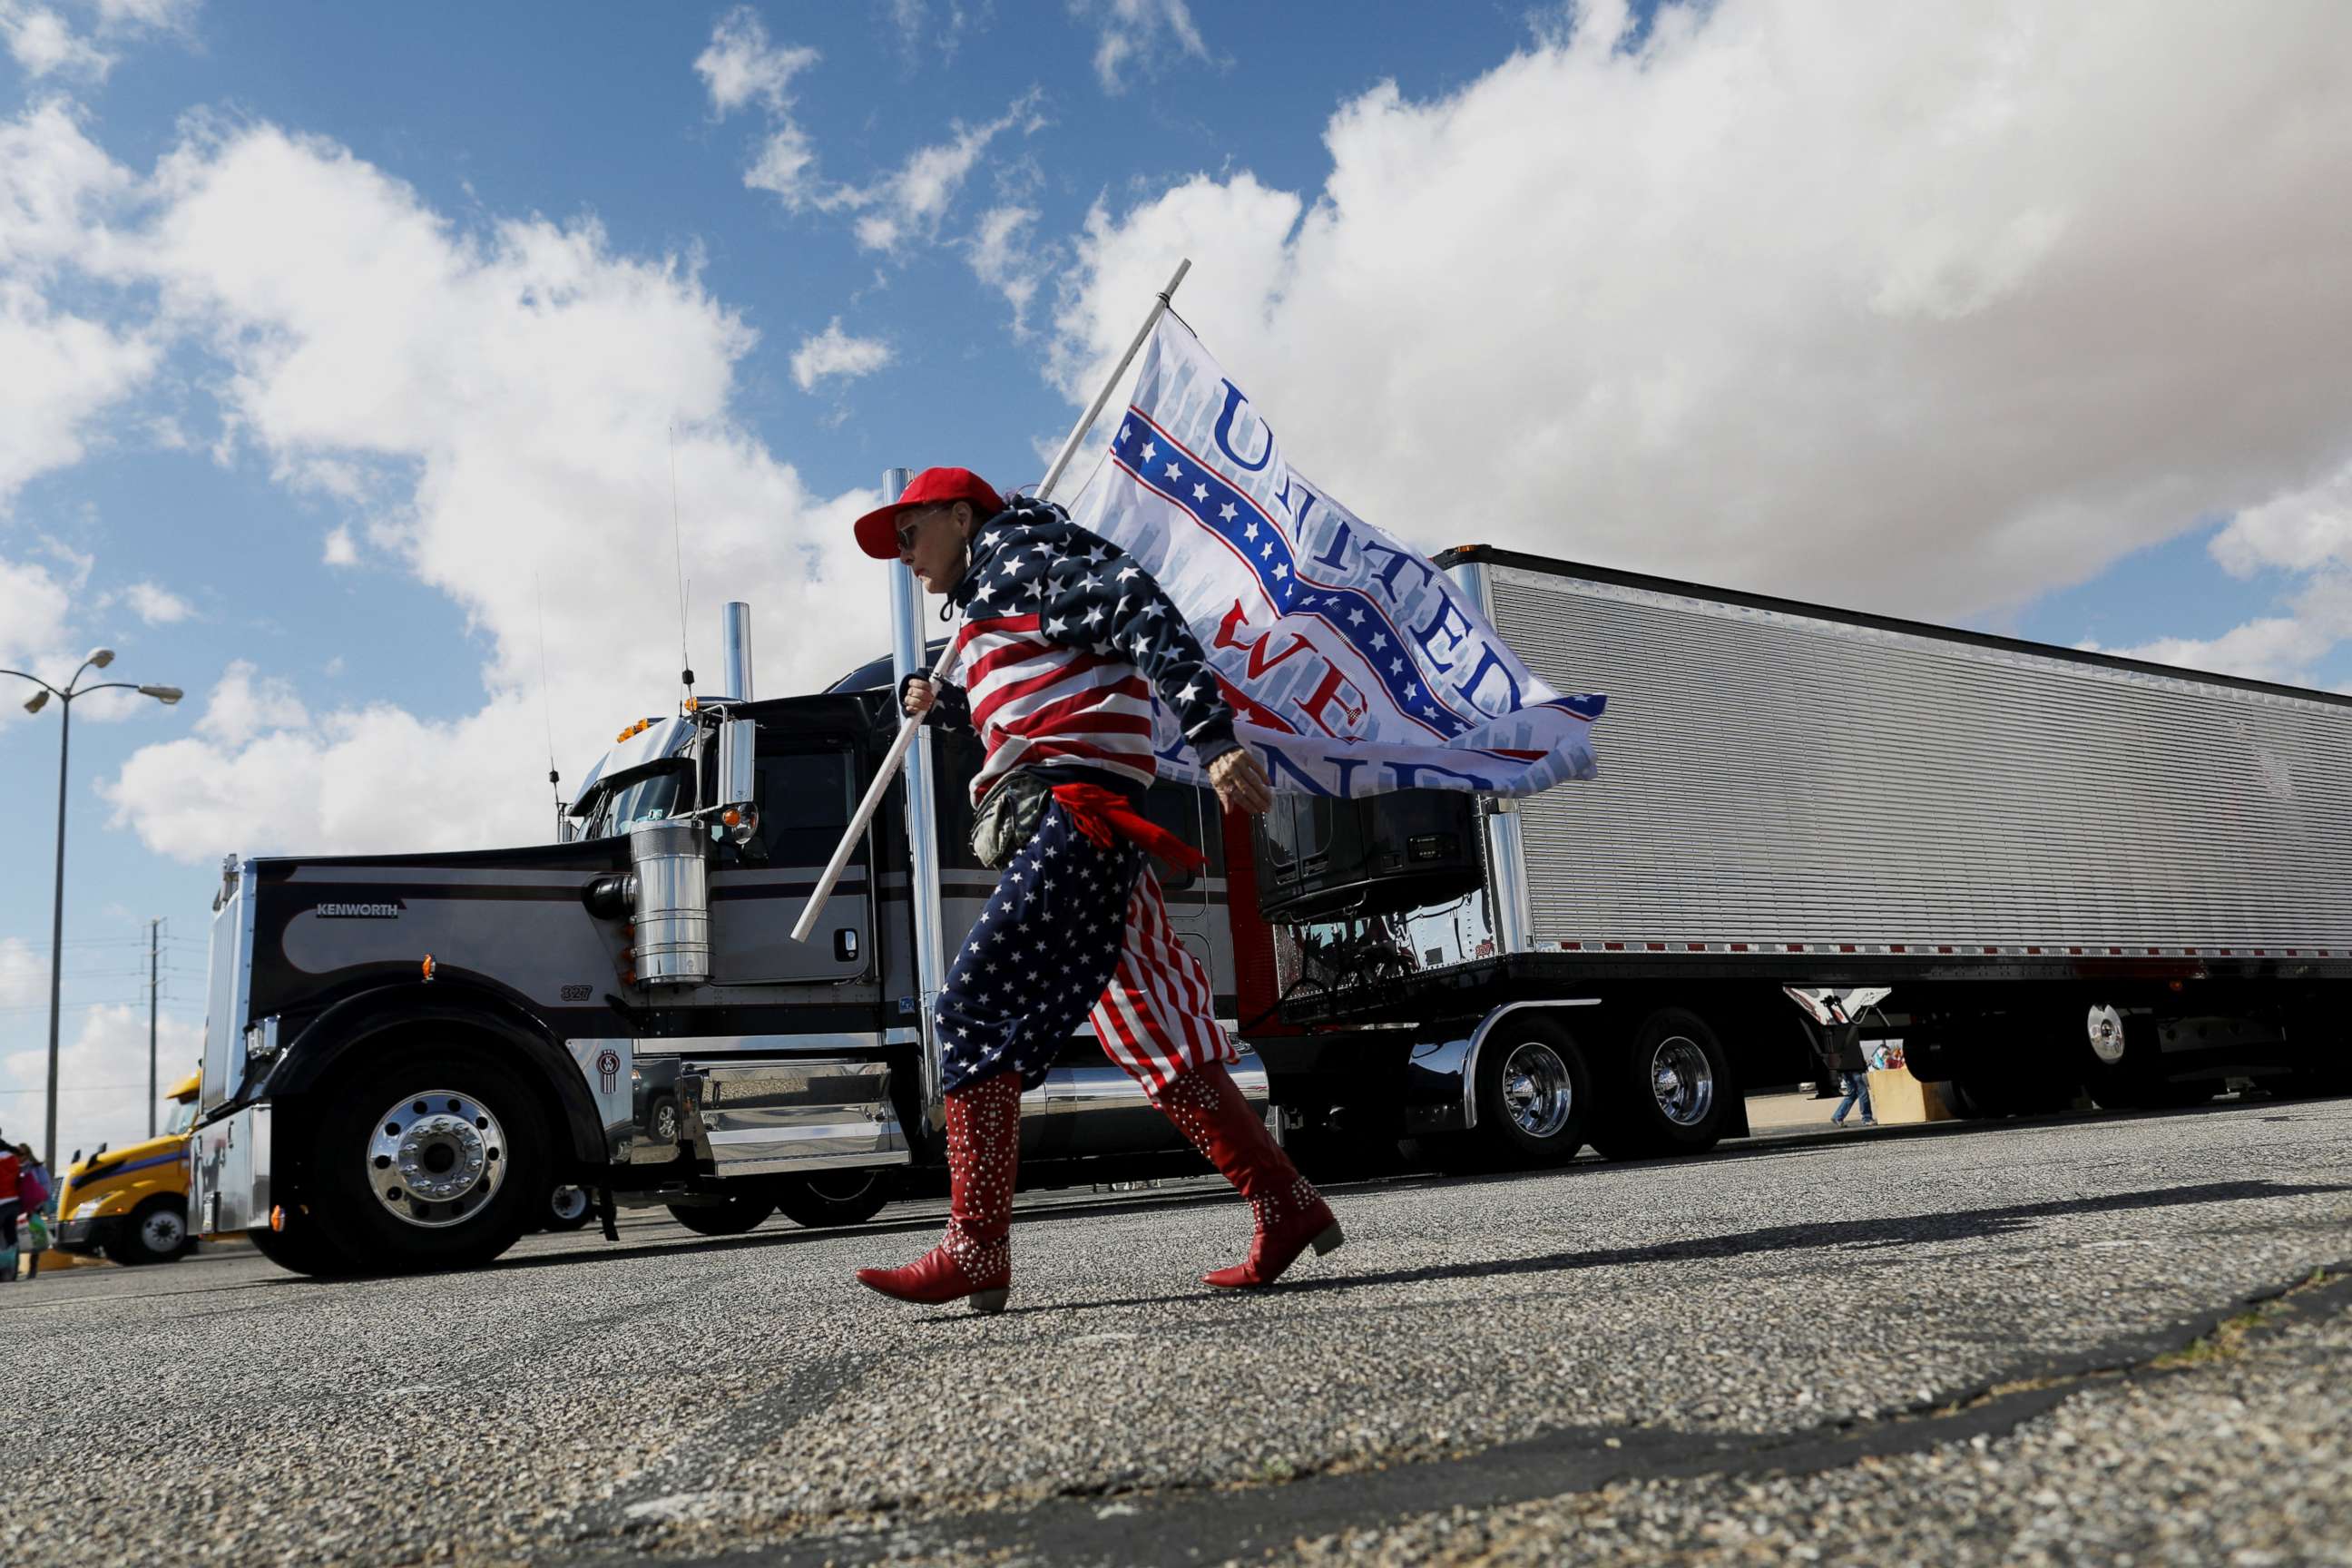 PHOTO: Truckers and supporters gather in California before a convoy leaves for the nation's capital to protest against COVID-19 vaccine mandates, Feb. 22, 2022.